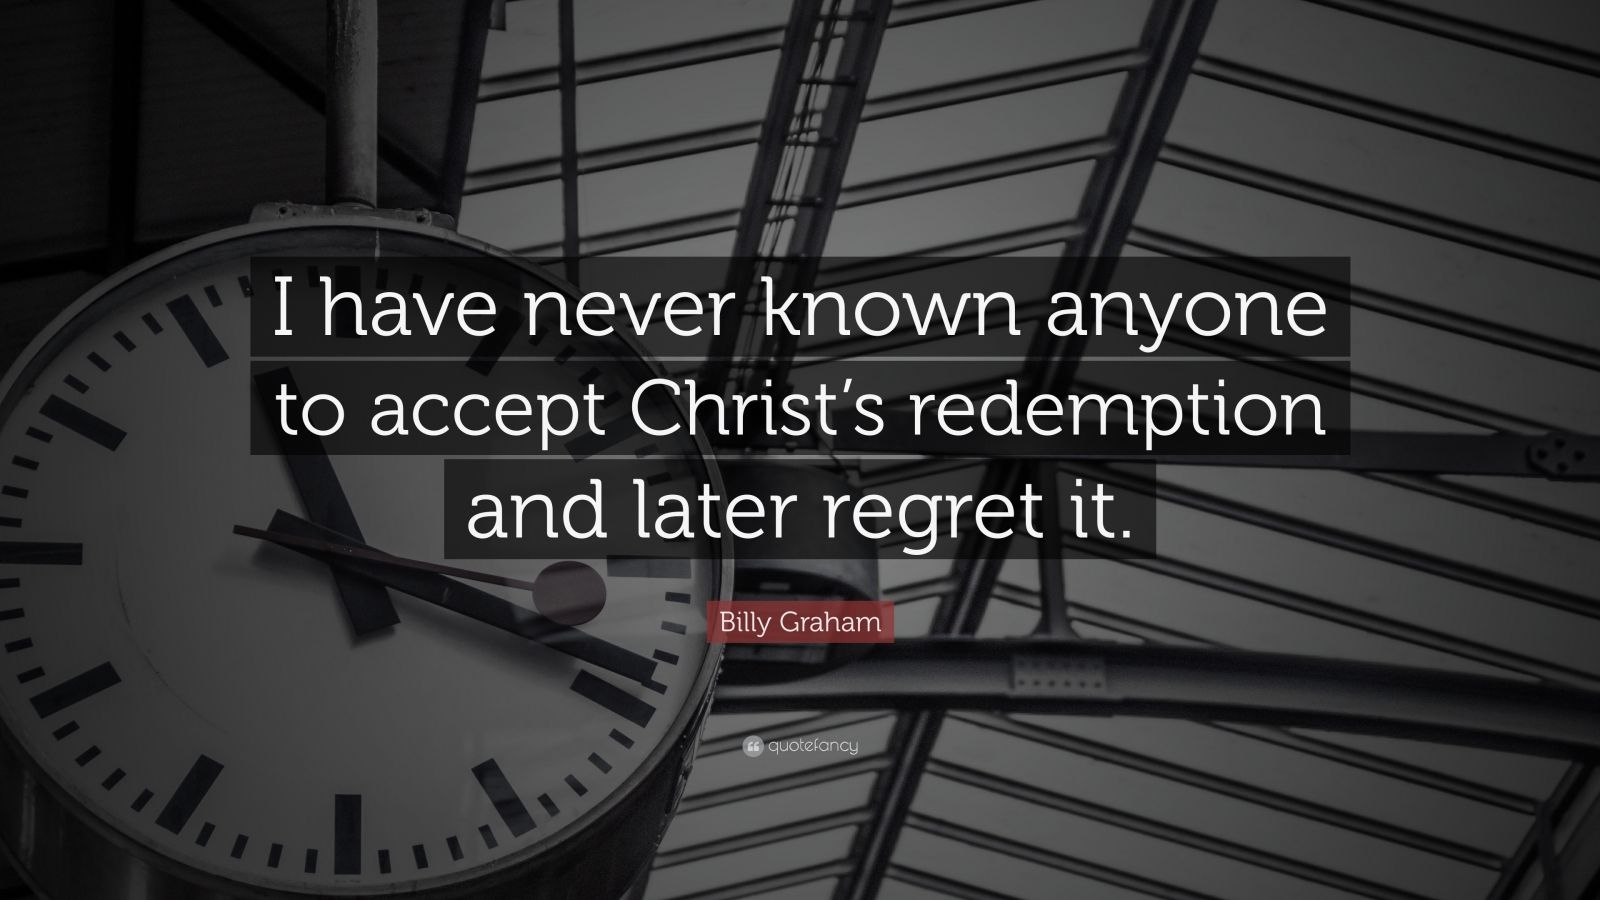 Billy Graham Quote: “I have never known anyone to accept Christ’s ...